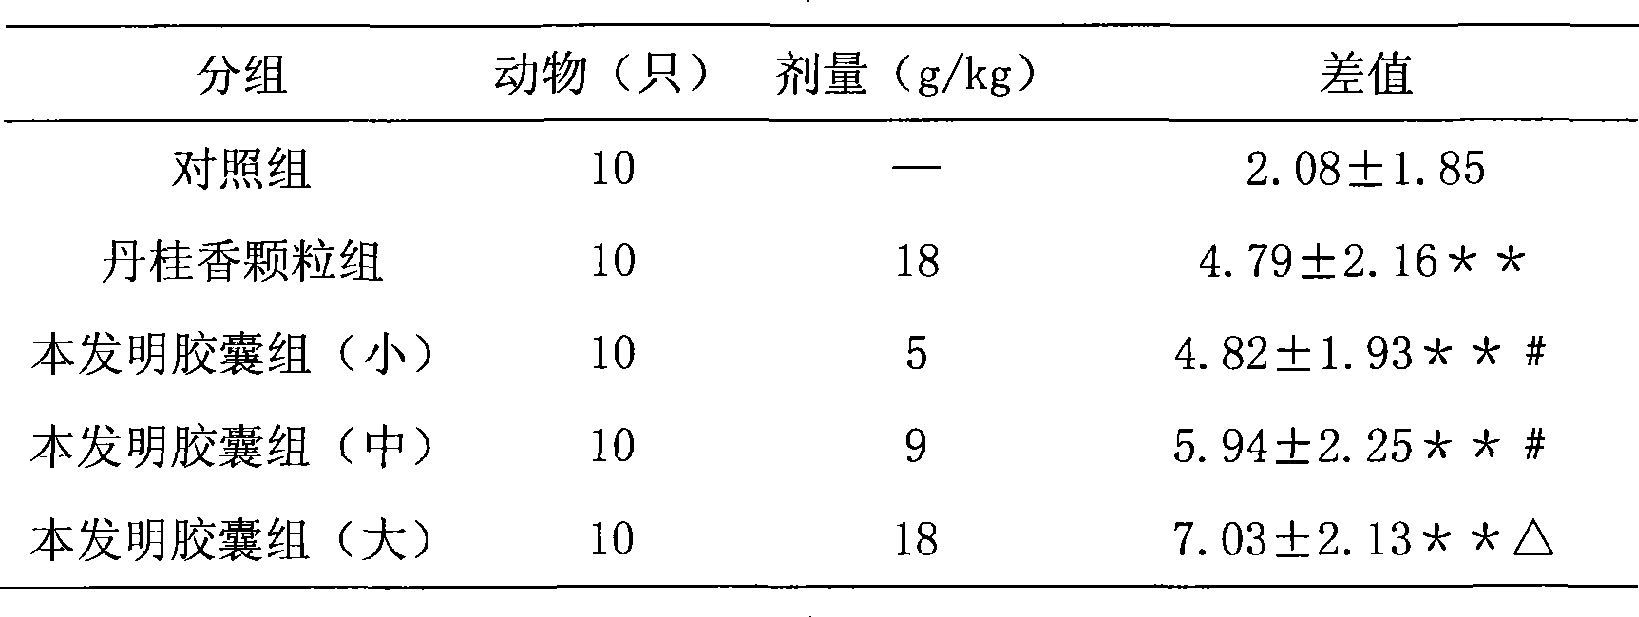 Traditional Chinese medicine formulation for treating gastrosis and preparation method thereof